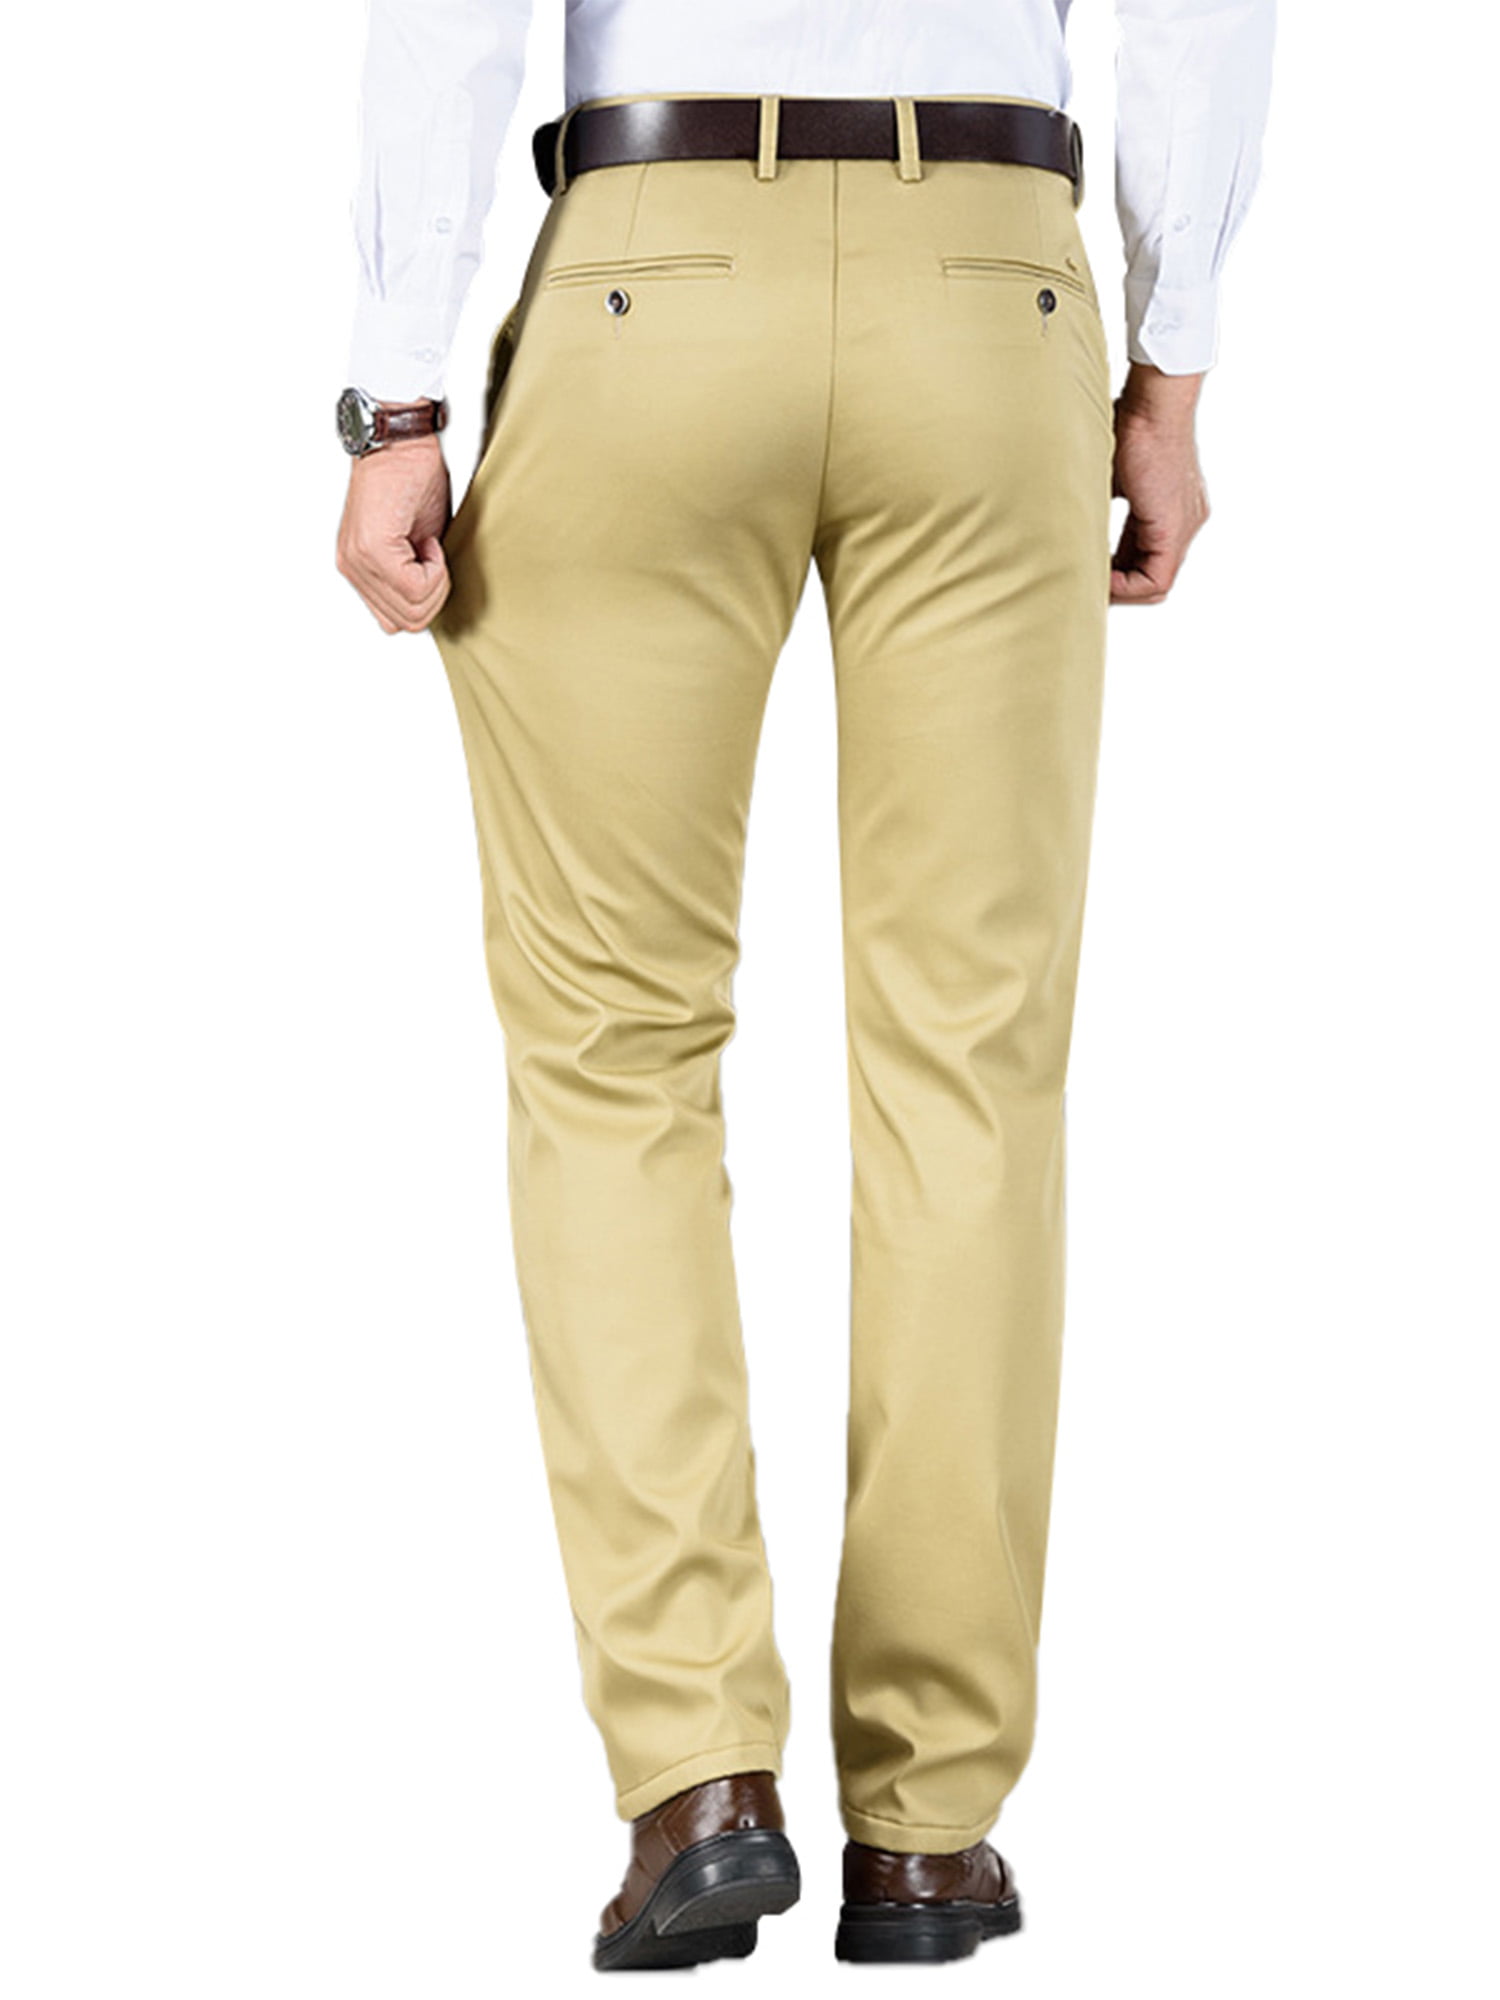 Men's stylish Regular Fit Cotton Pant cream color - Online shopping in  Nepal, Nepal online shopping, Send gifts, Farlin product, Wall decor  canvas, dolls, buy gadgets, bed furniture, dinning chairs, sofa, baby